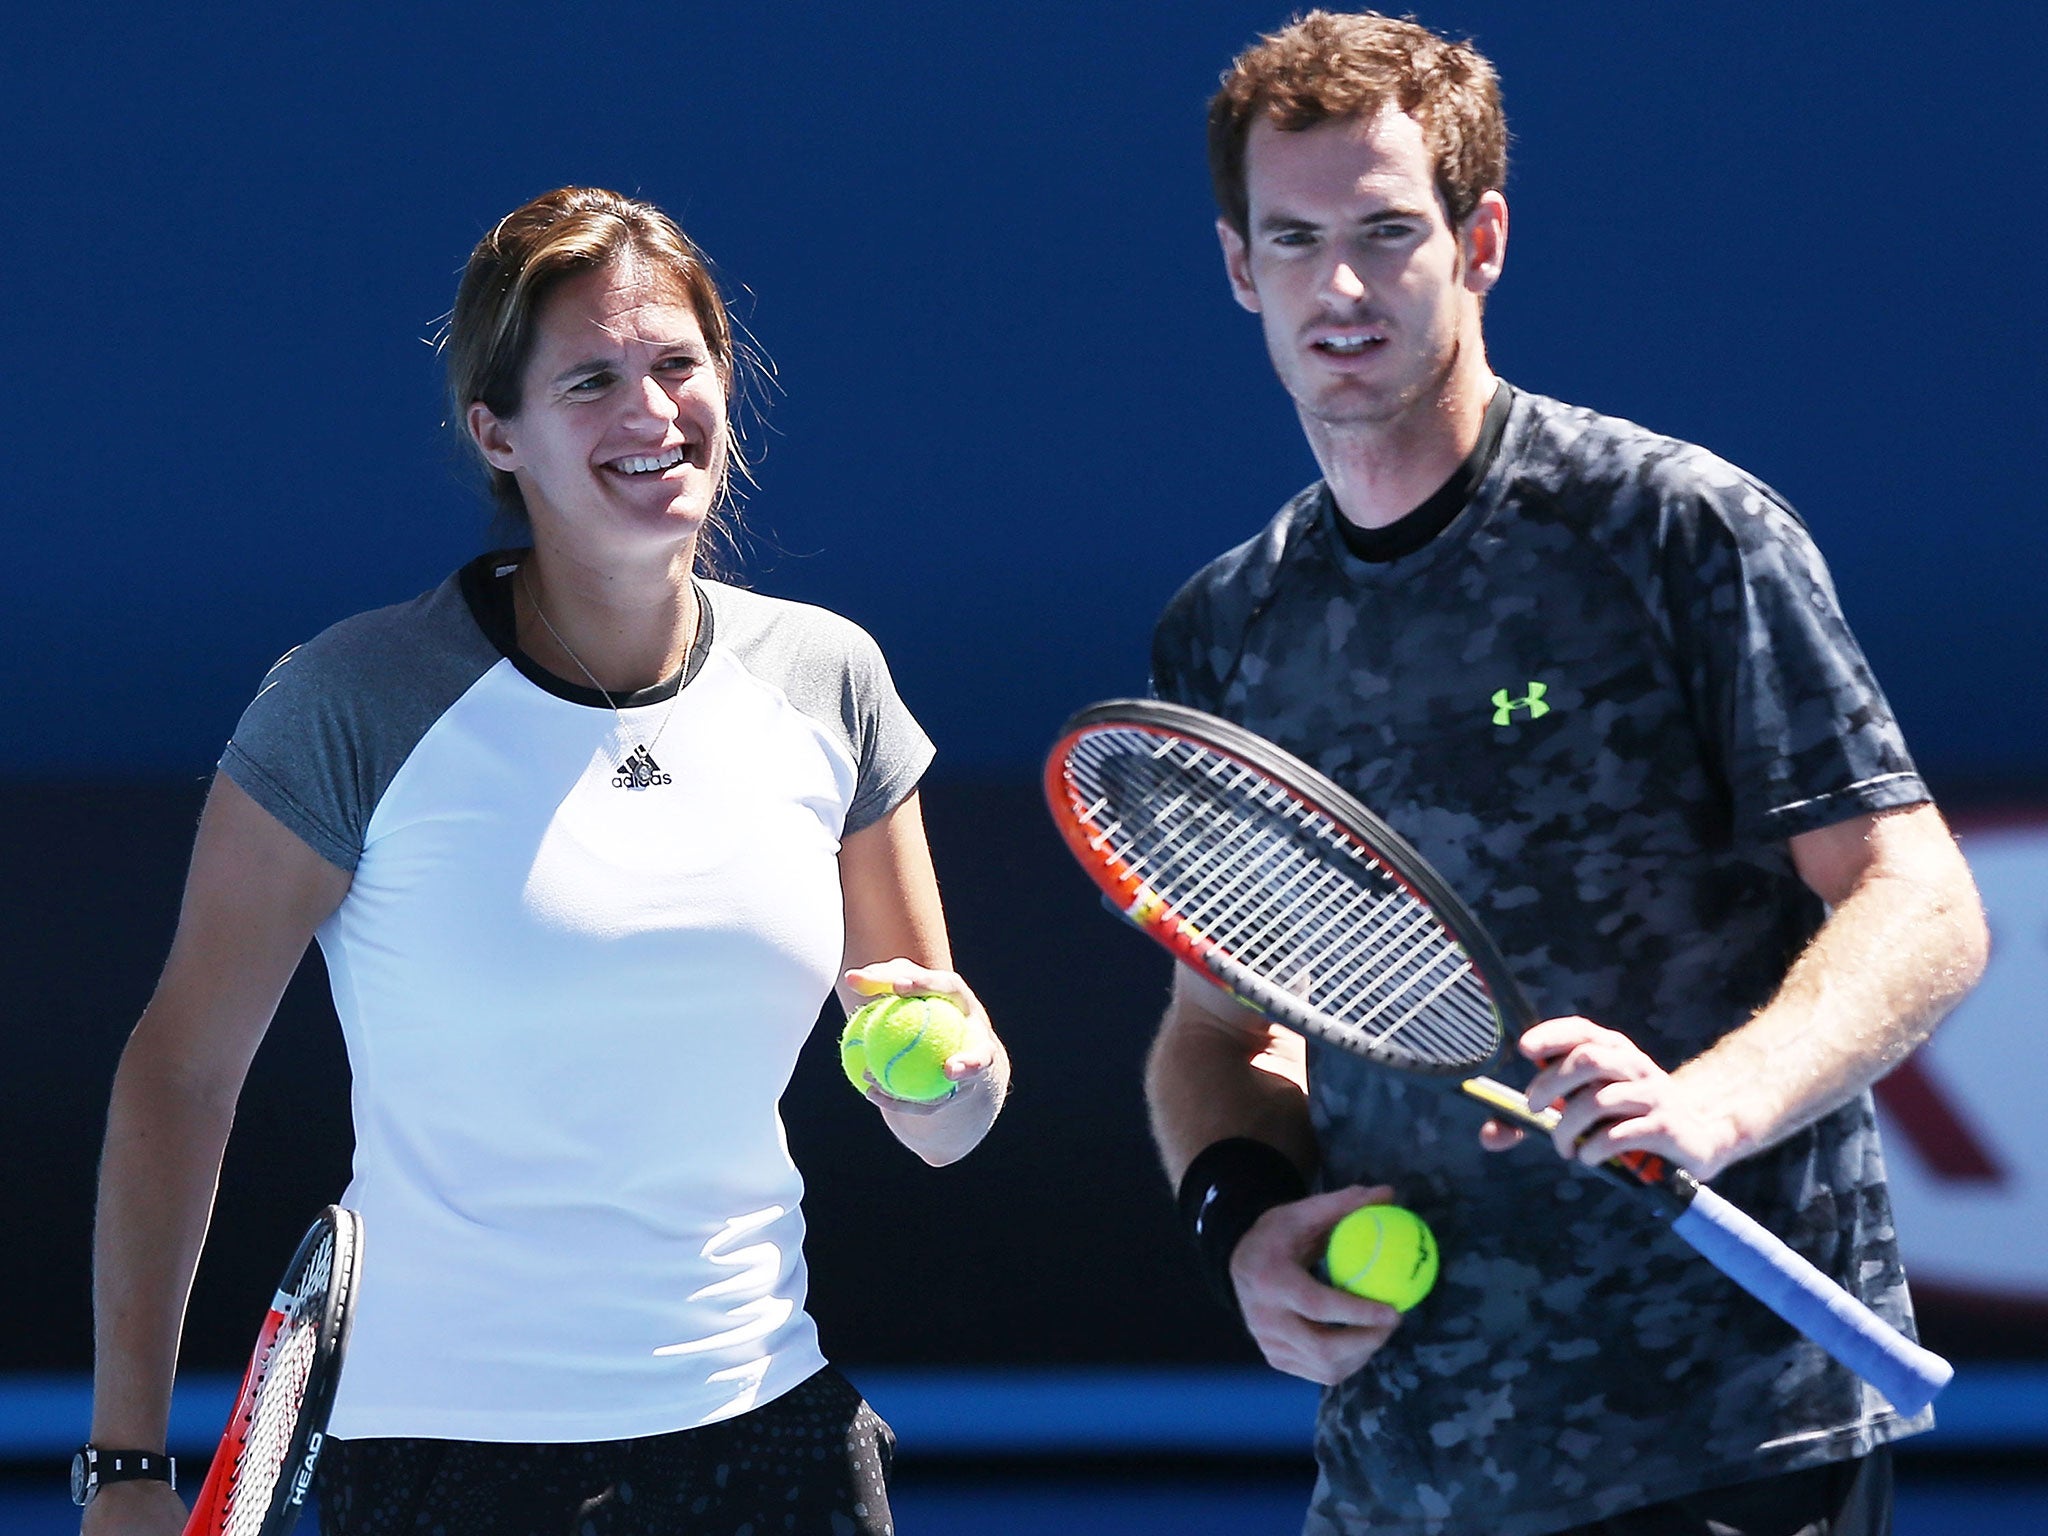 Andy Murray (right) works with coach Amélie Mauresmo during a practice session ahead of the Australian Open